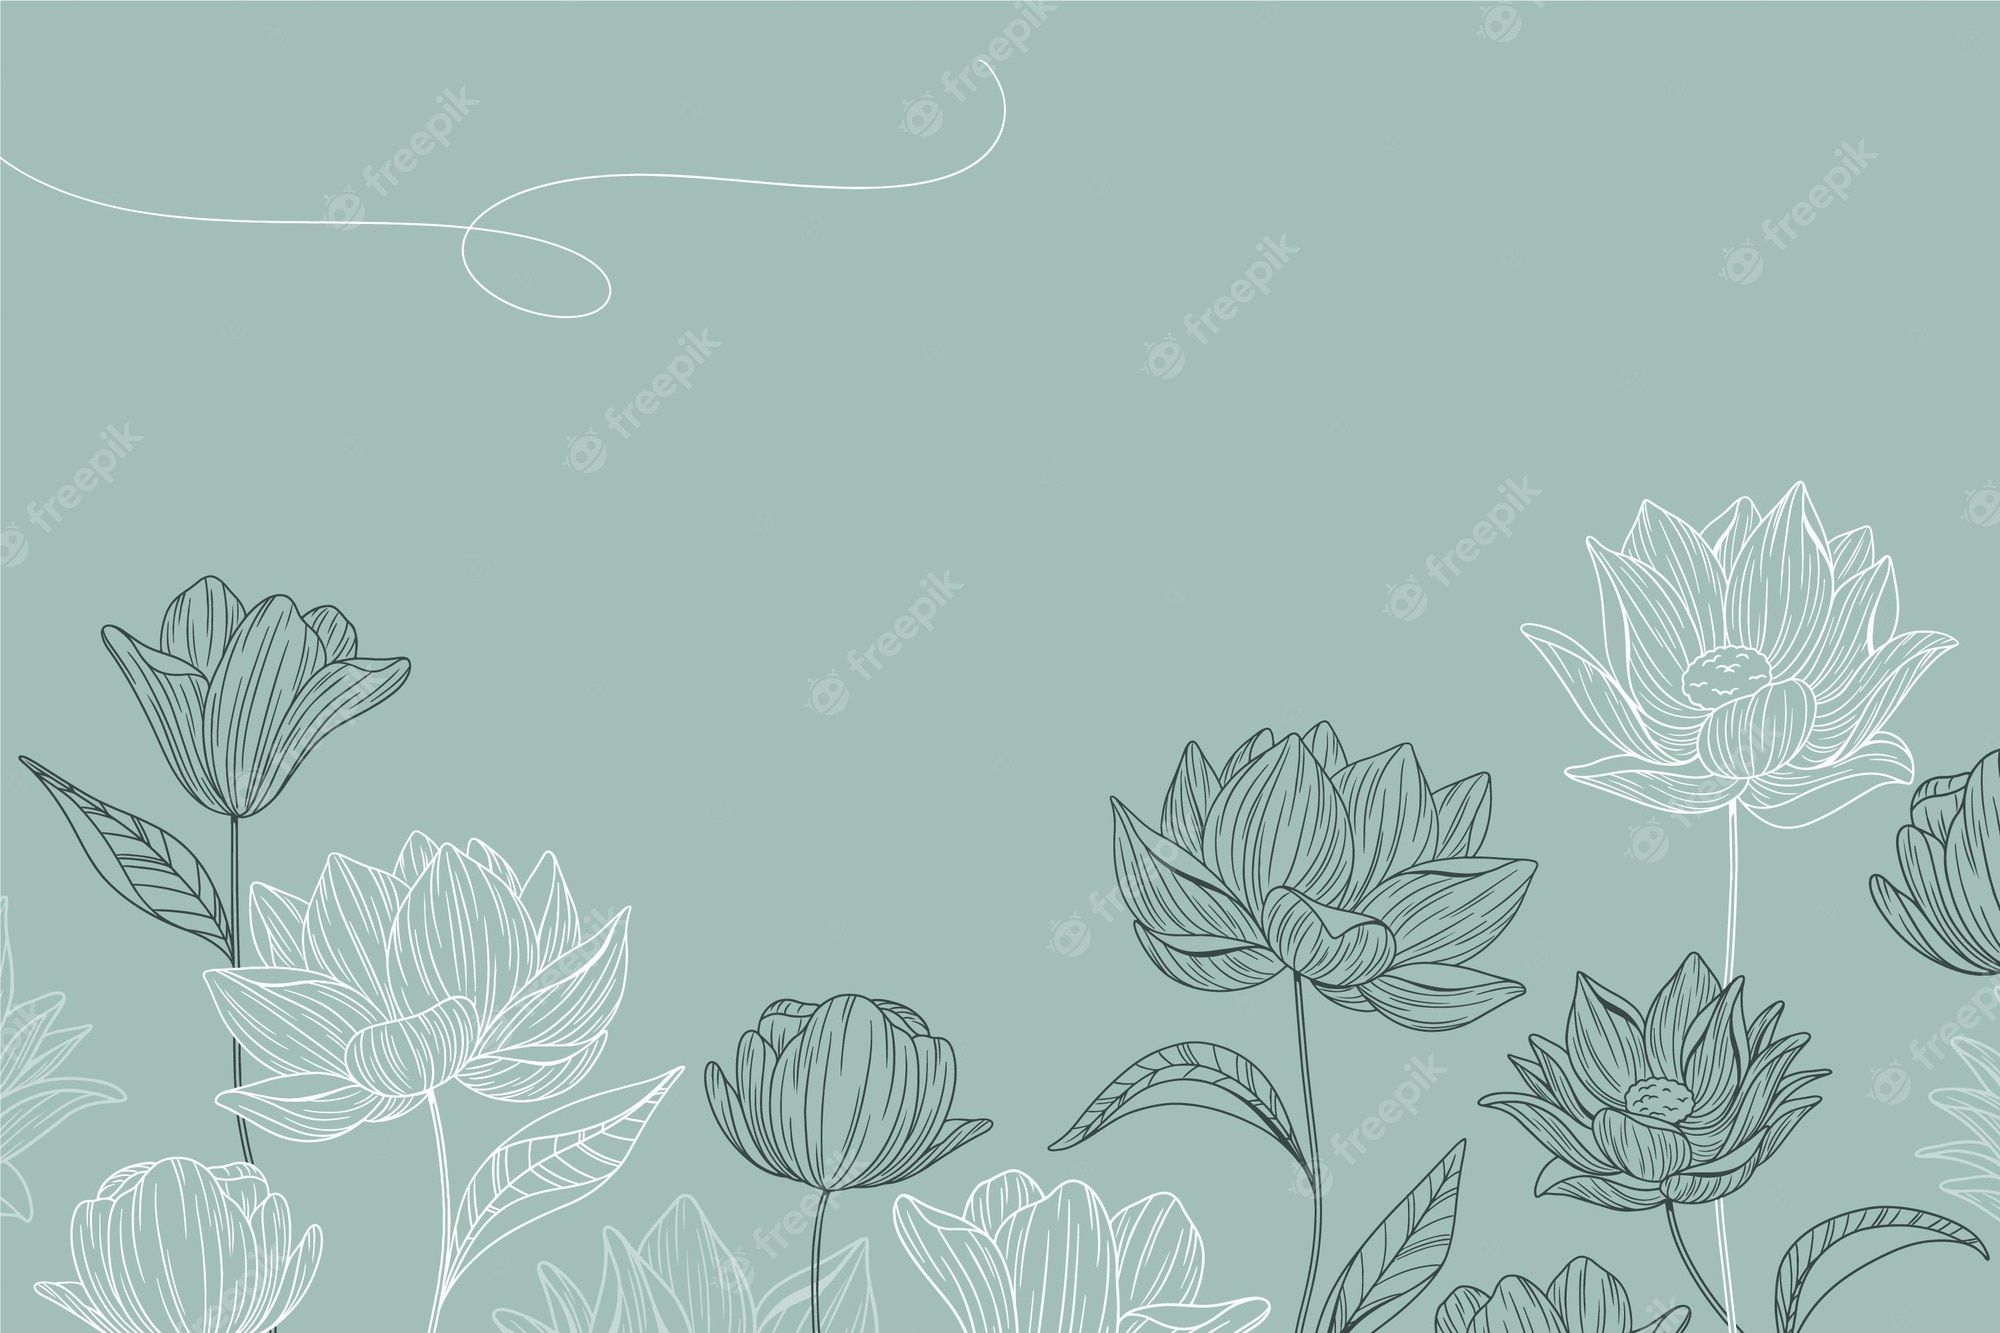 A blue background with a white floral pattern - Simple